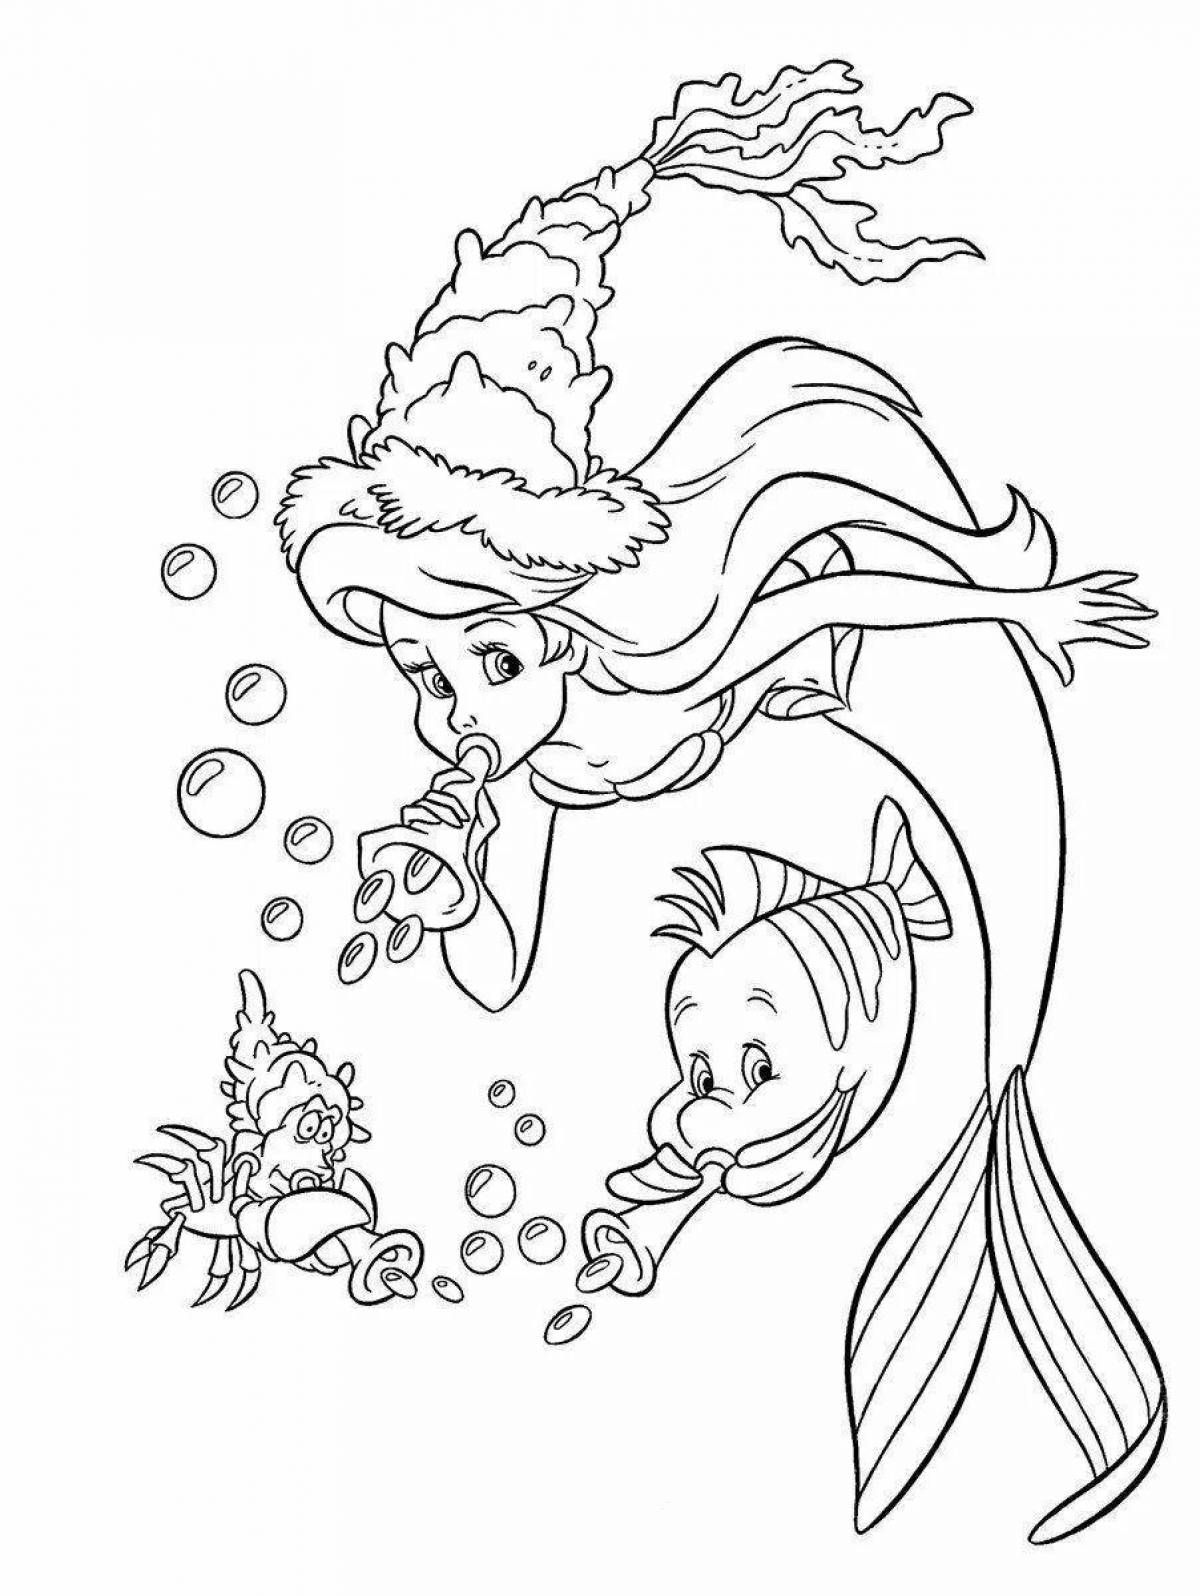 Outstanding ariel little mermaid coloring book for kids